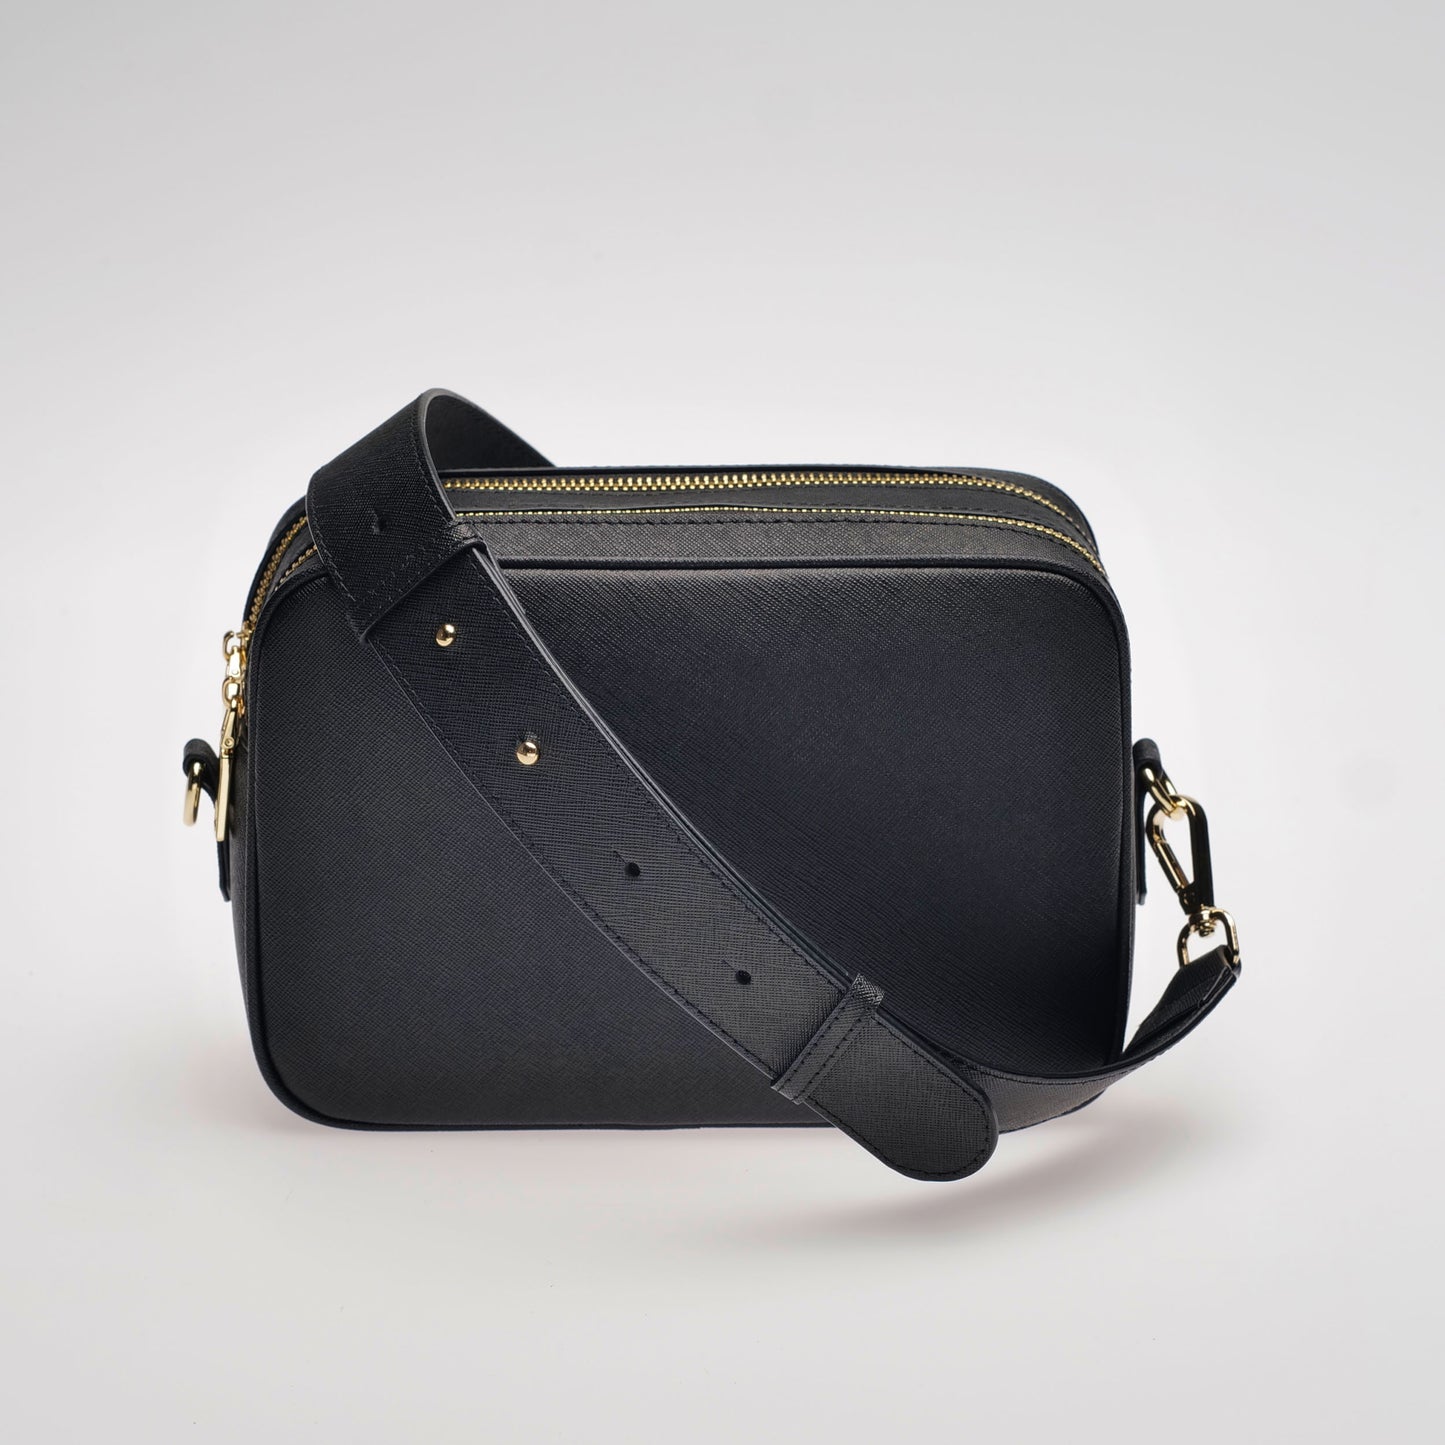 James Saffiano Leather Crossbody Bag in Midnight Black by Swoon London